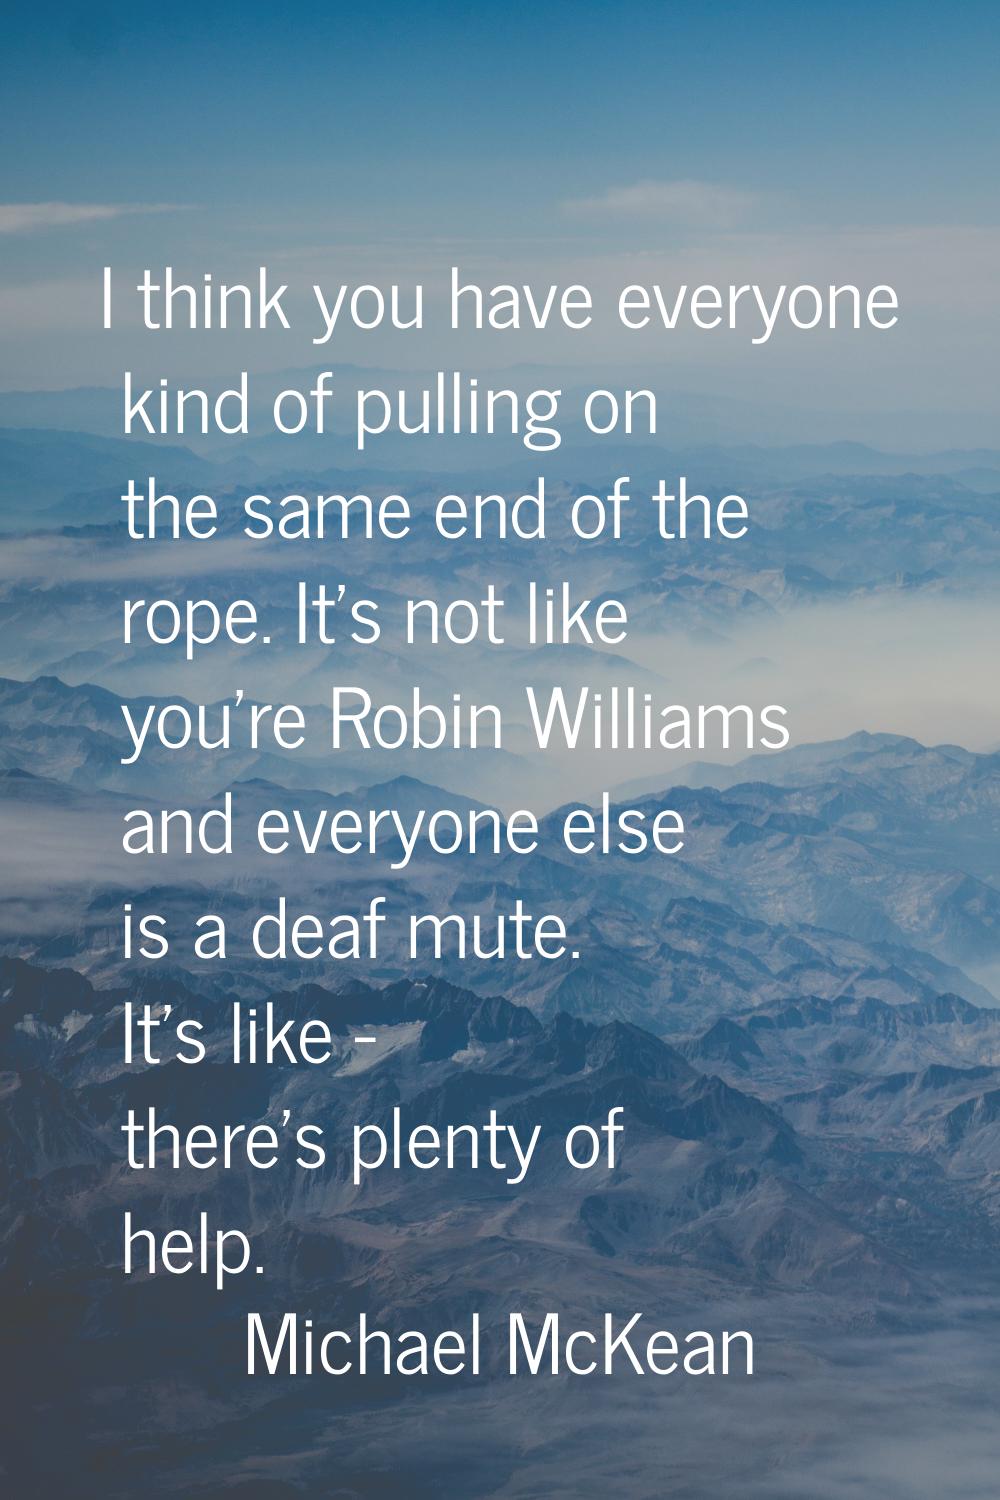 I think you have everyone kind of pulling on the same end of the rope. It's not like you're Robin W